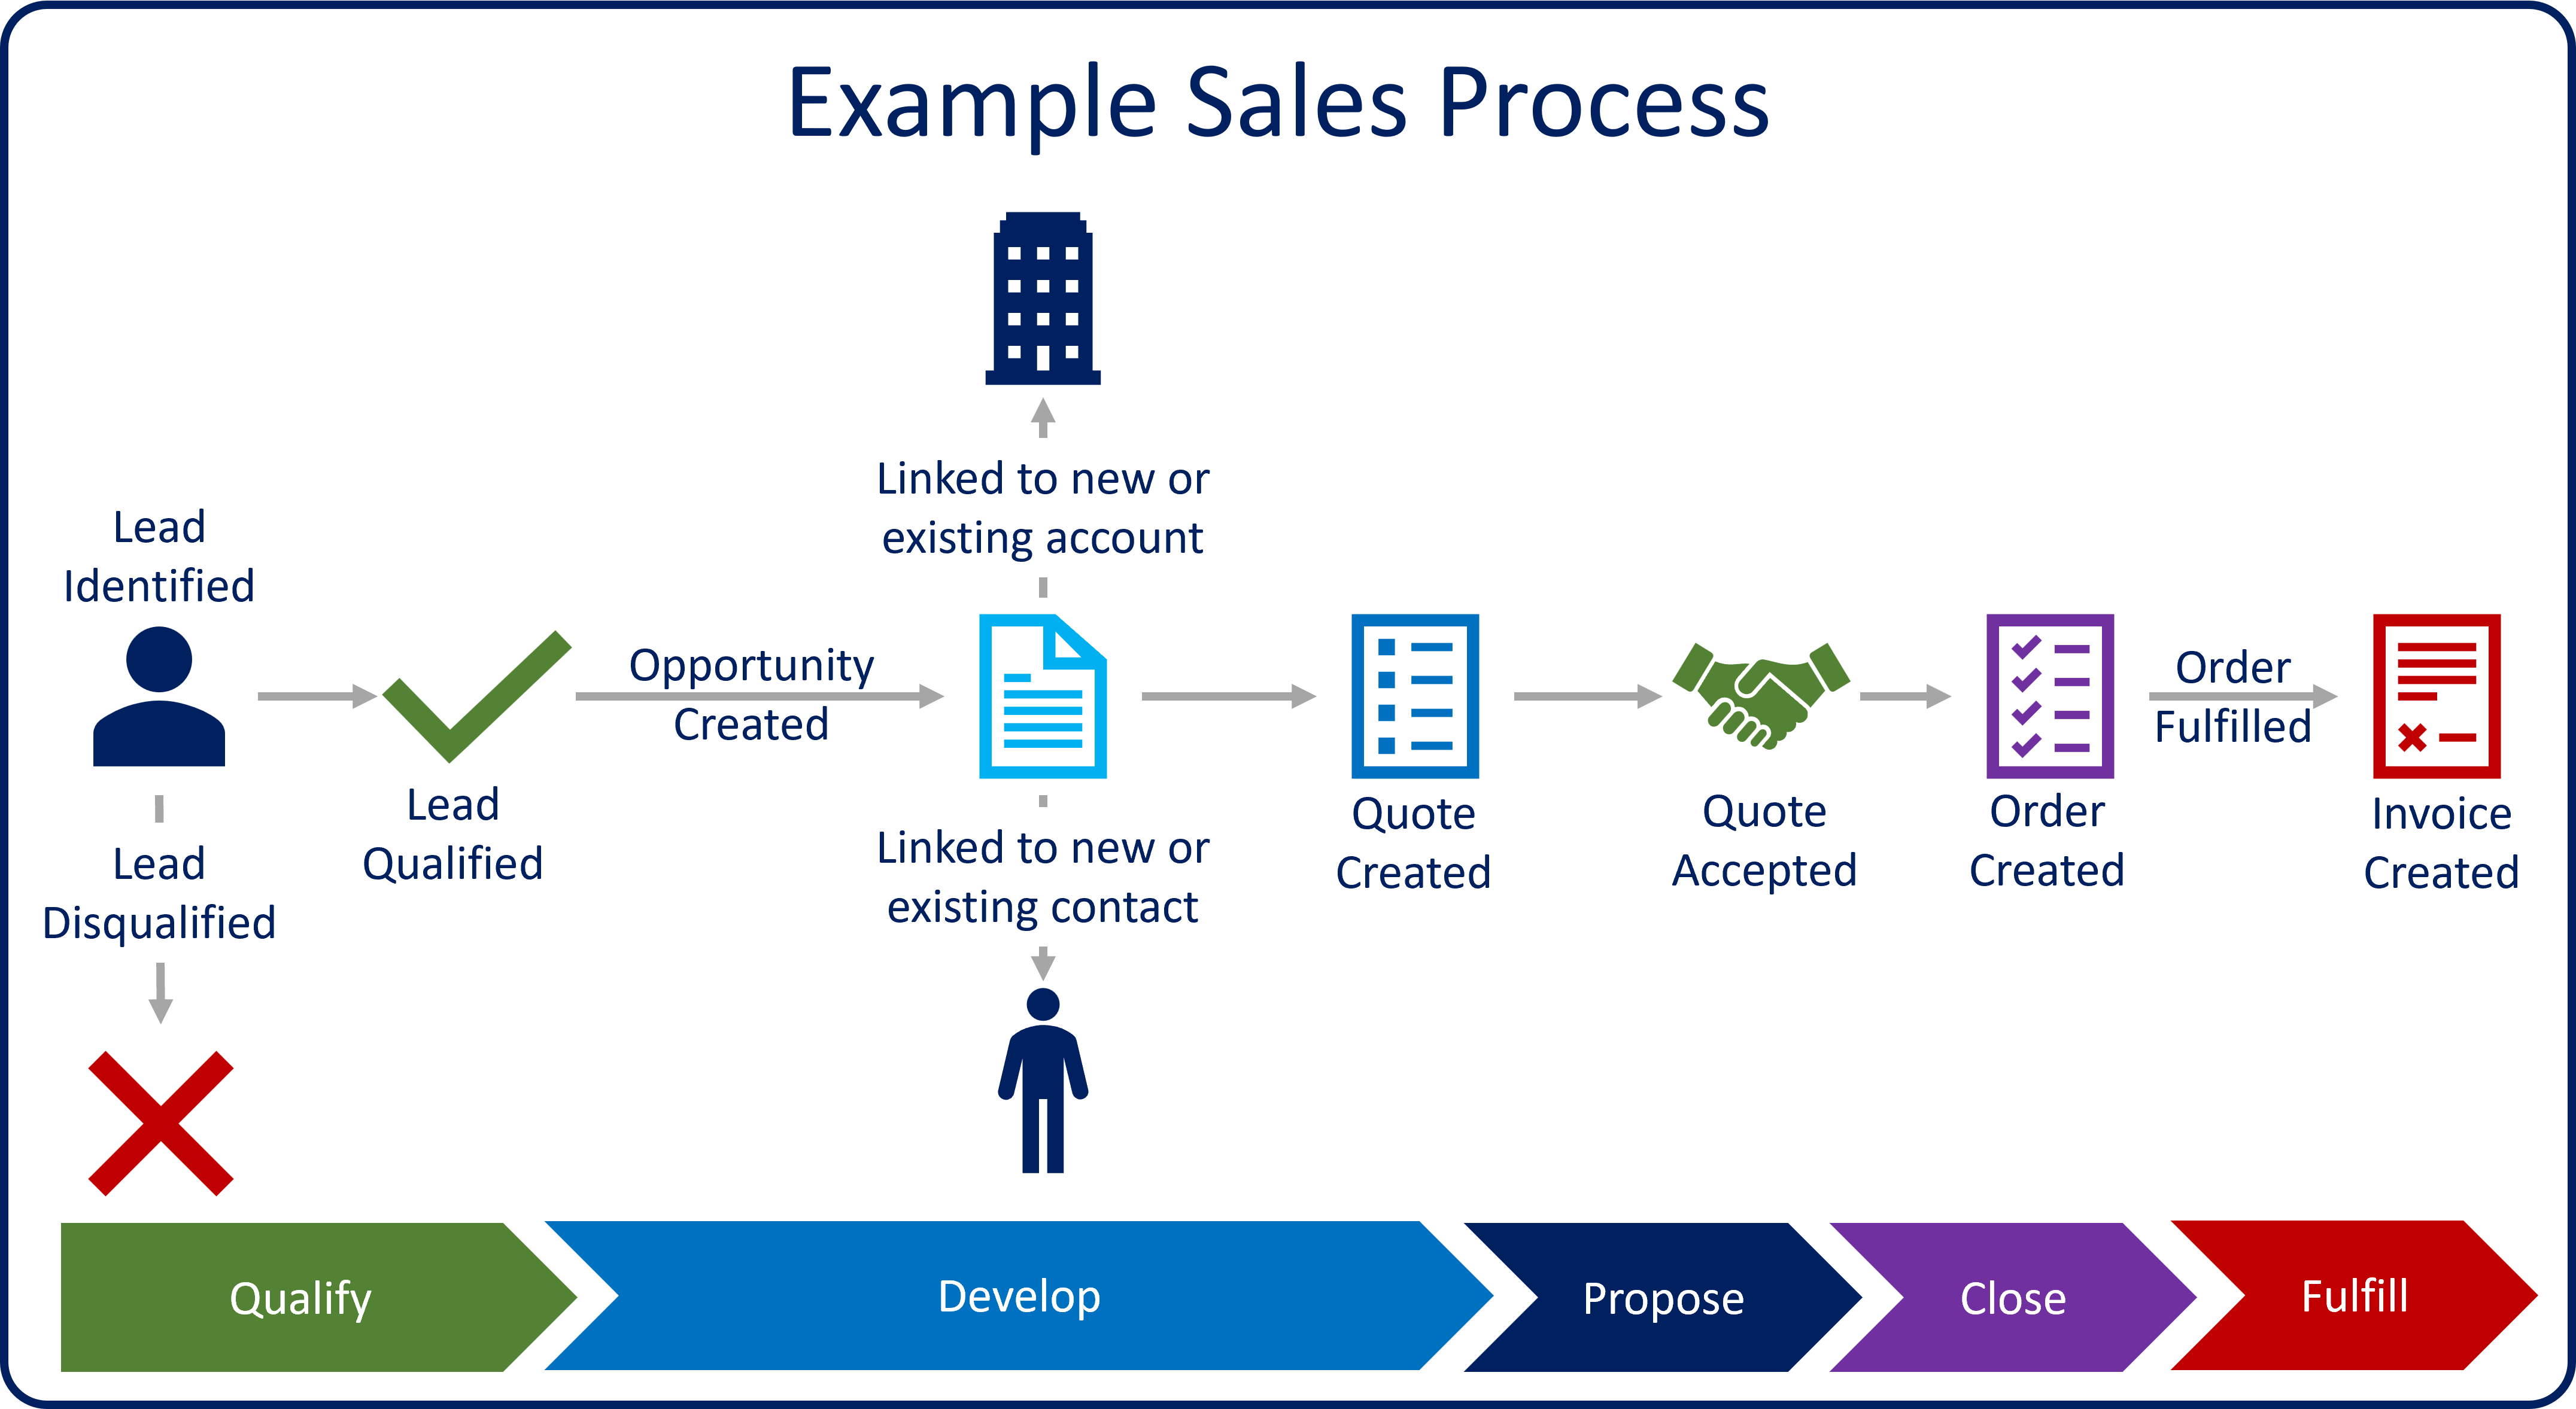 Detailed illustration of sales process starting with lead qualification and ending with invoice creation.